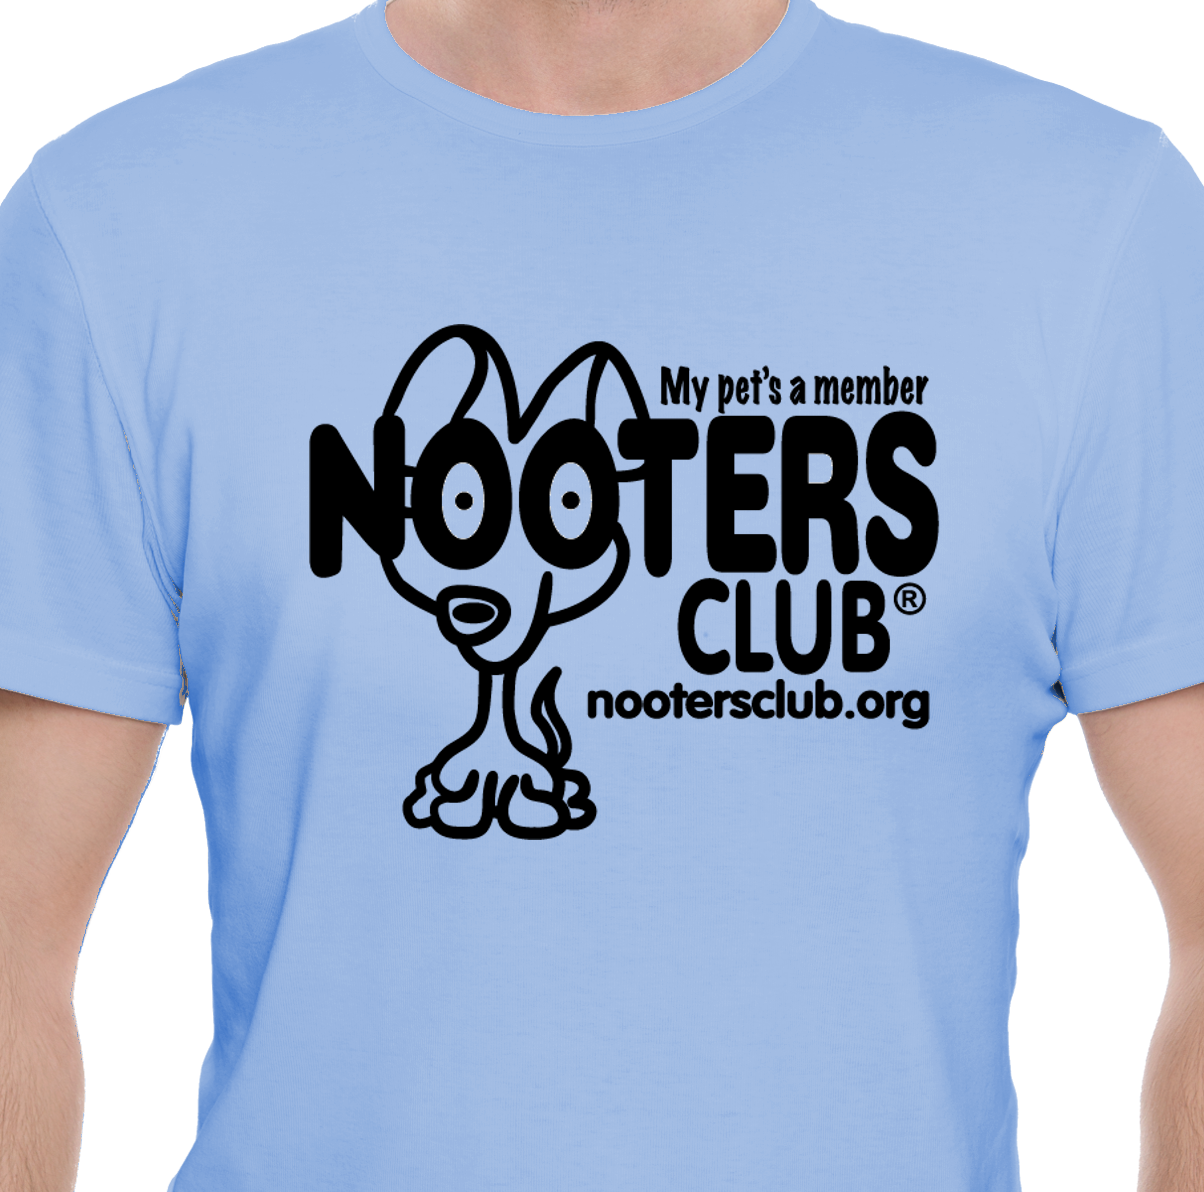 Nooters club will donate $5 from shirt sales to Fort Wayne Pit Bull Coalition! 